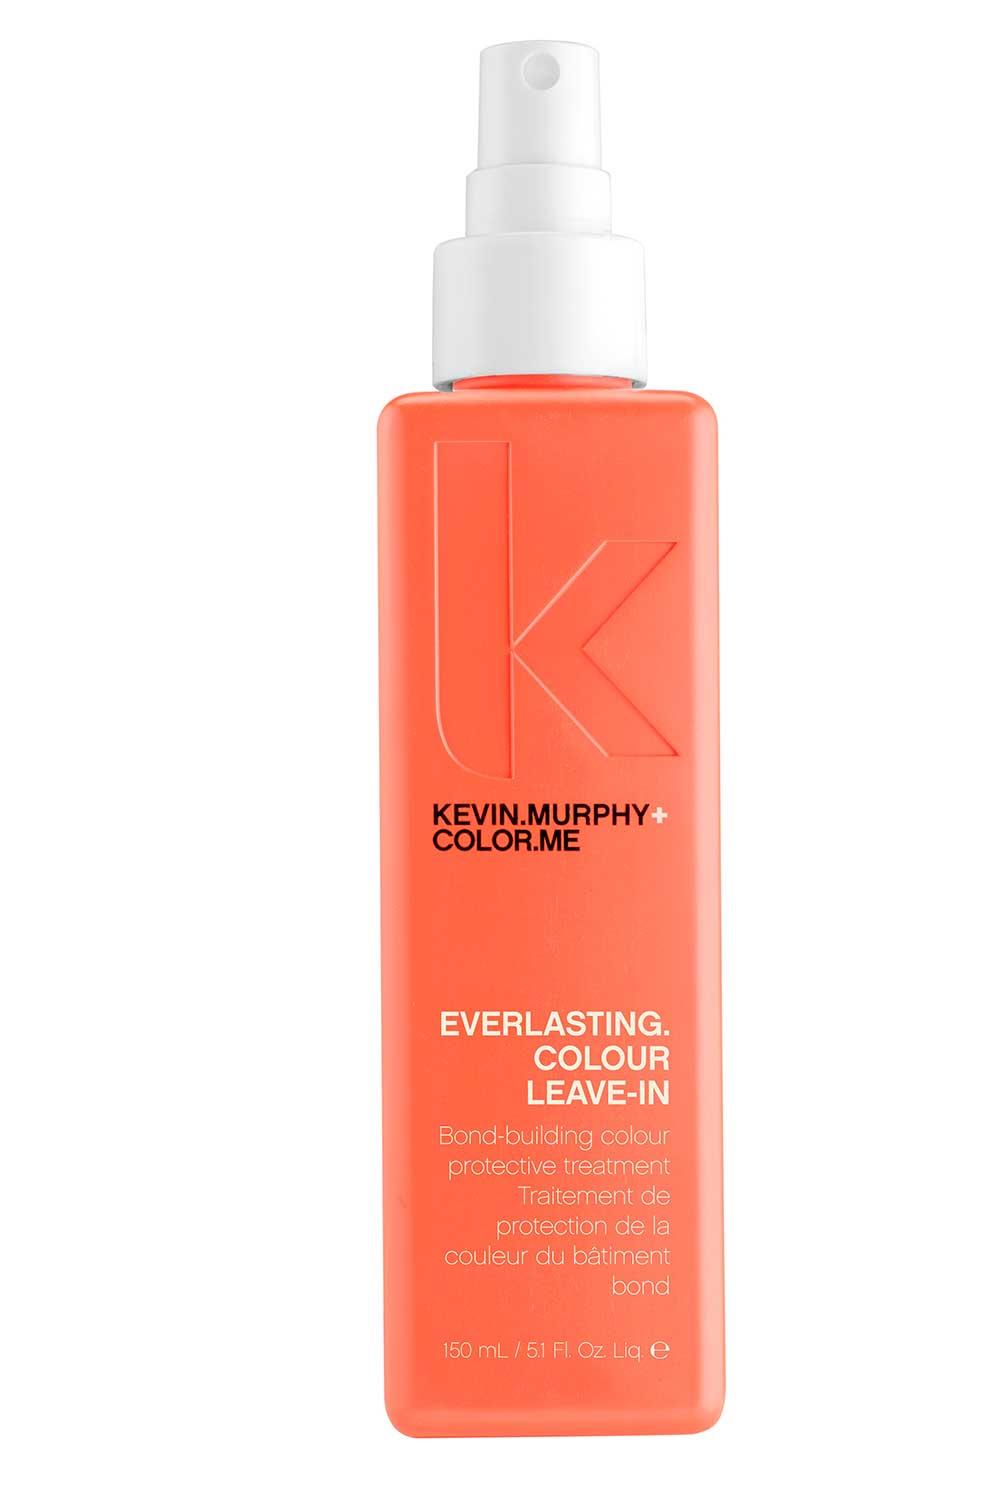  Spray protector de color EVERLASTING.COLOUR LEAVE-IN, Kevin Murphy